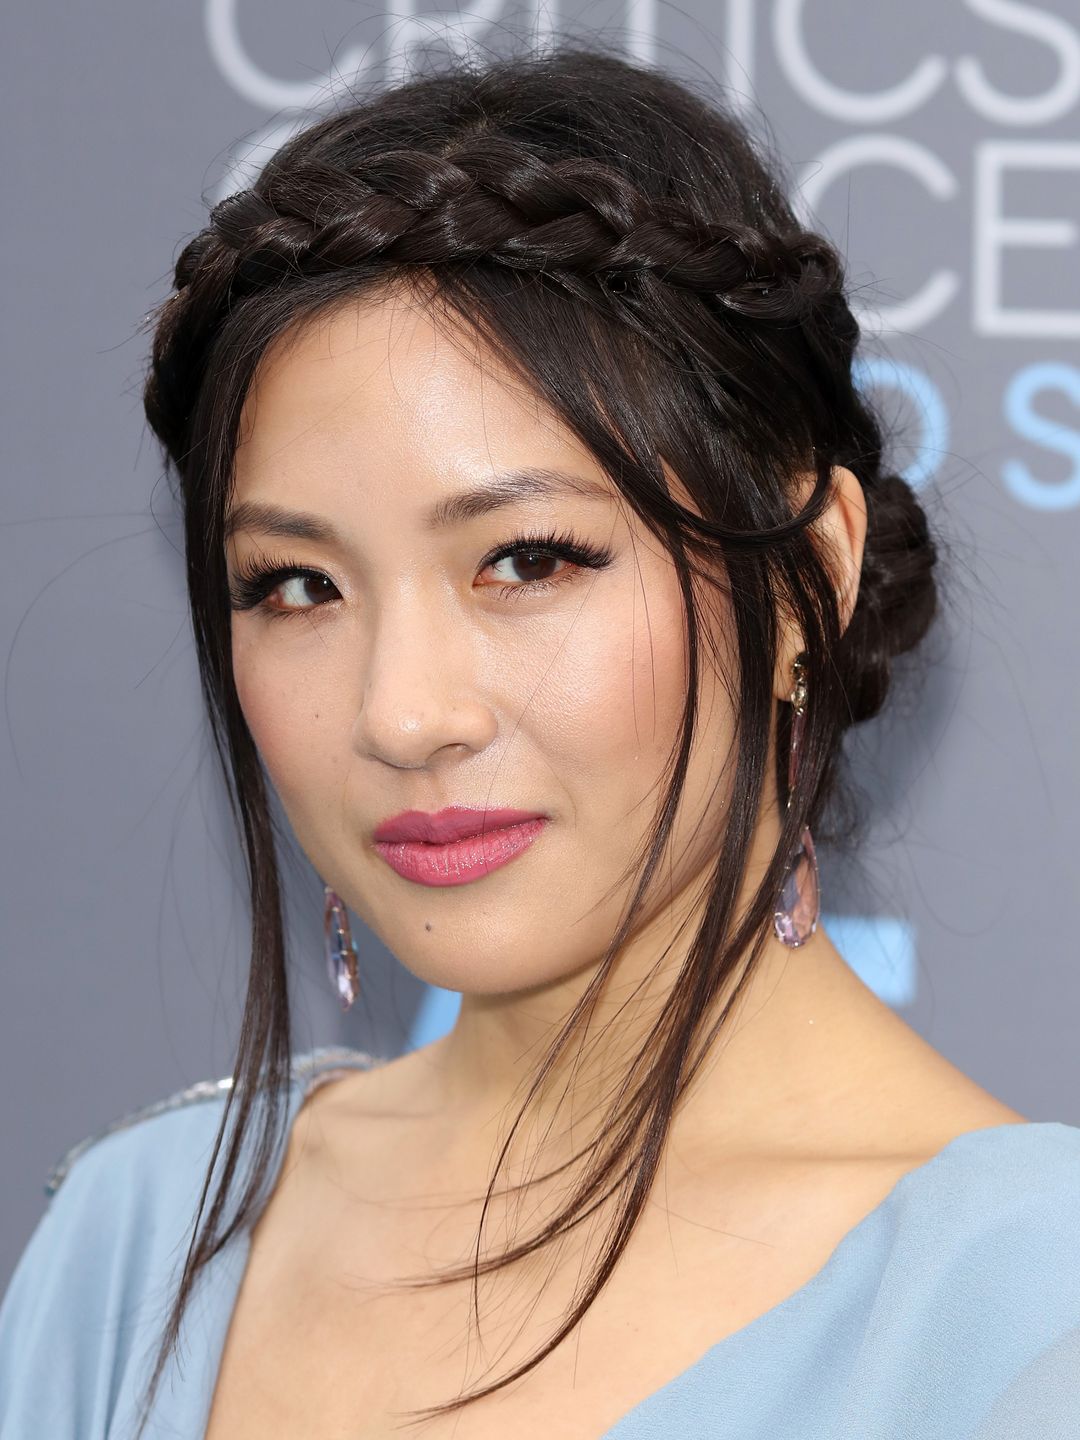 Constance Wu unphotoshopped pictures